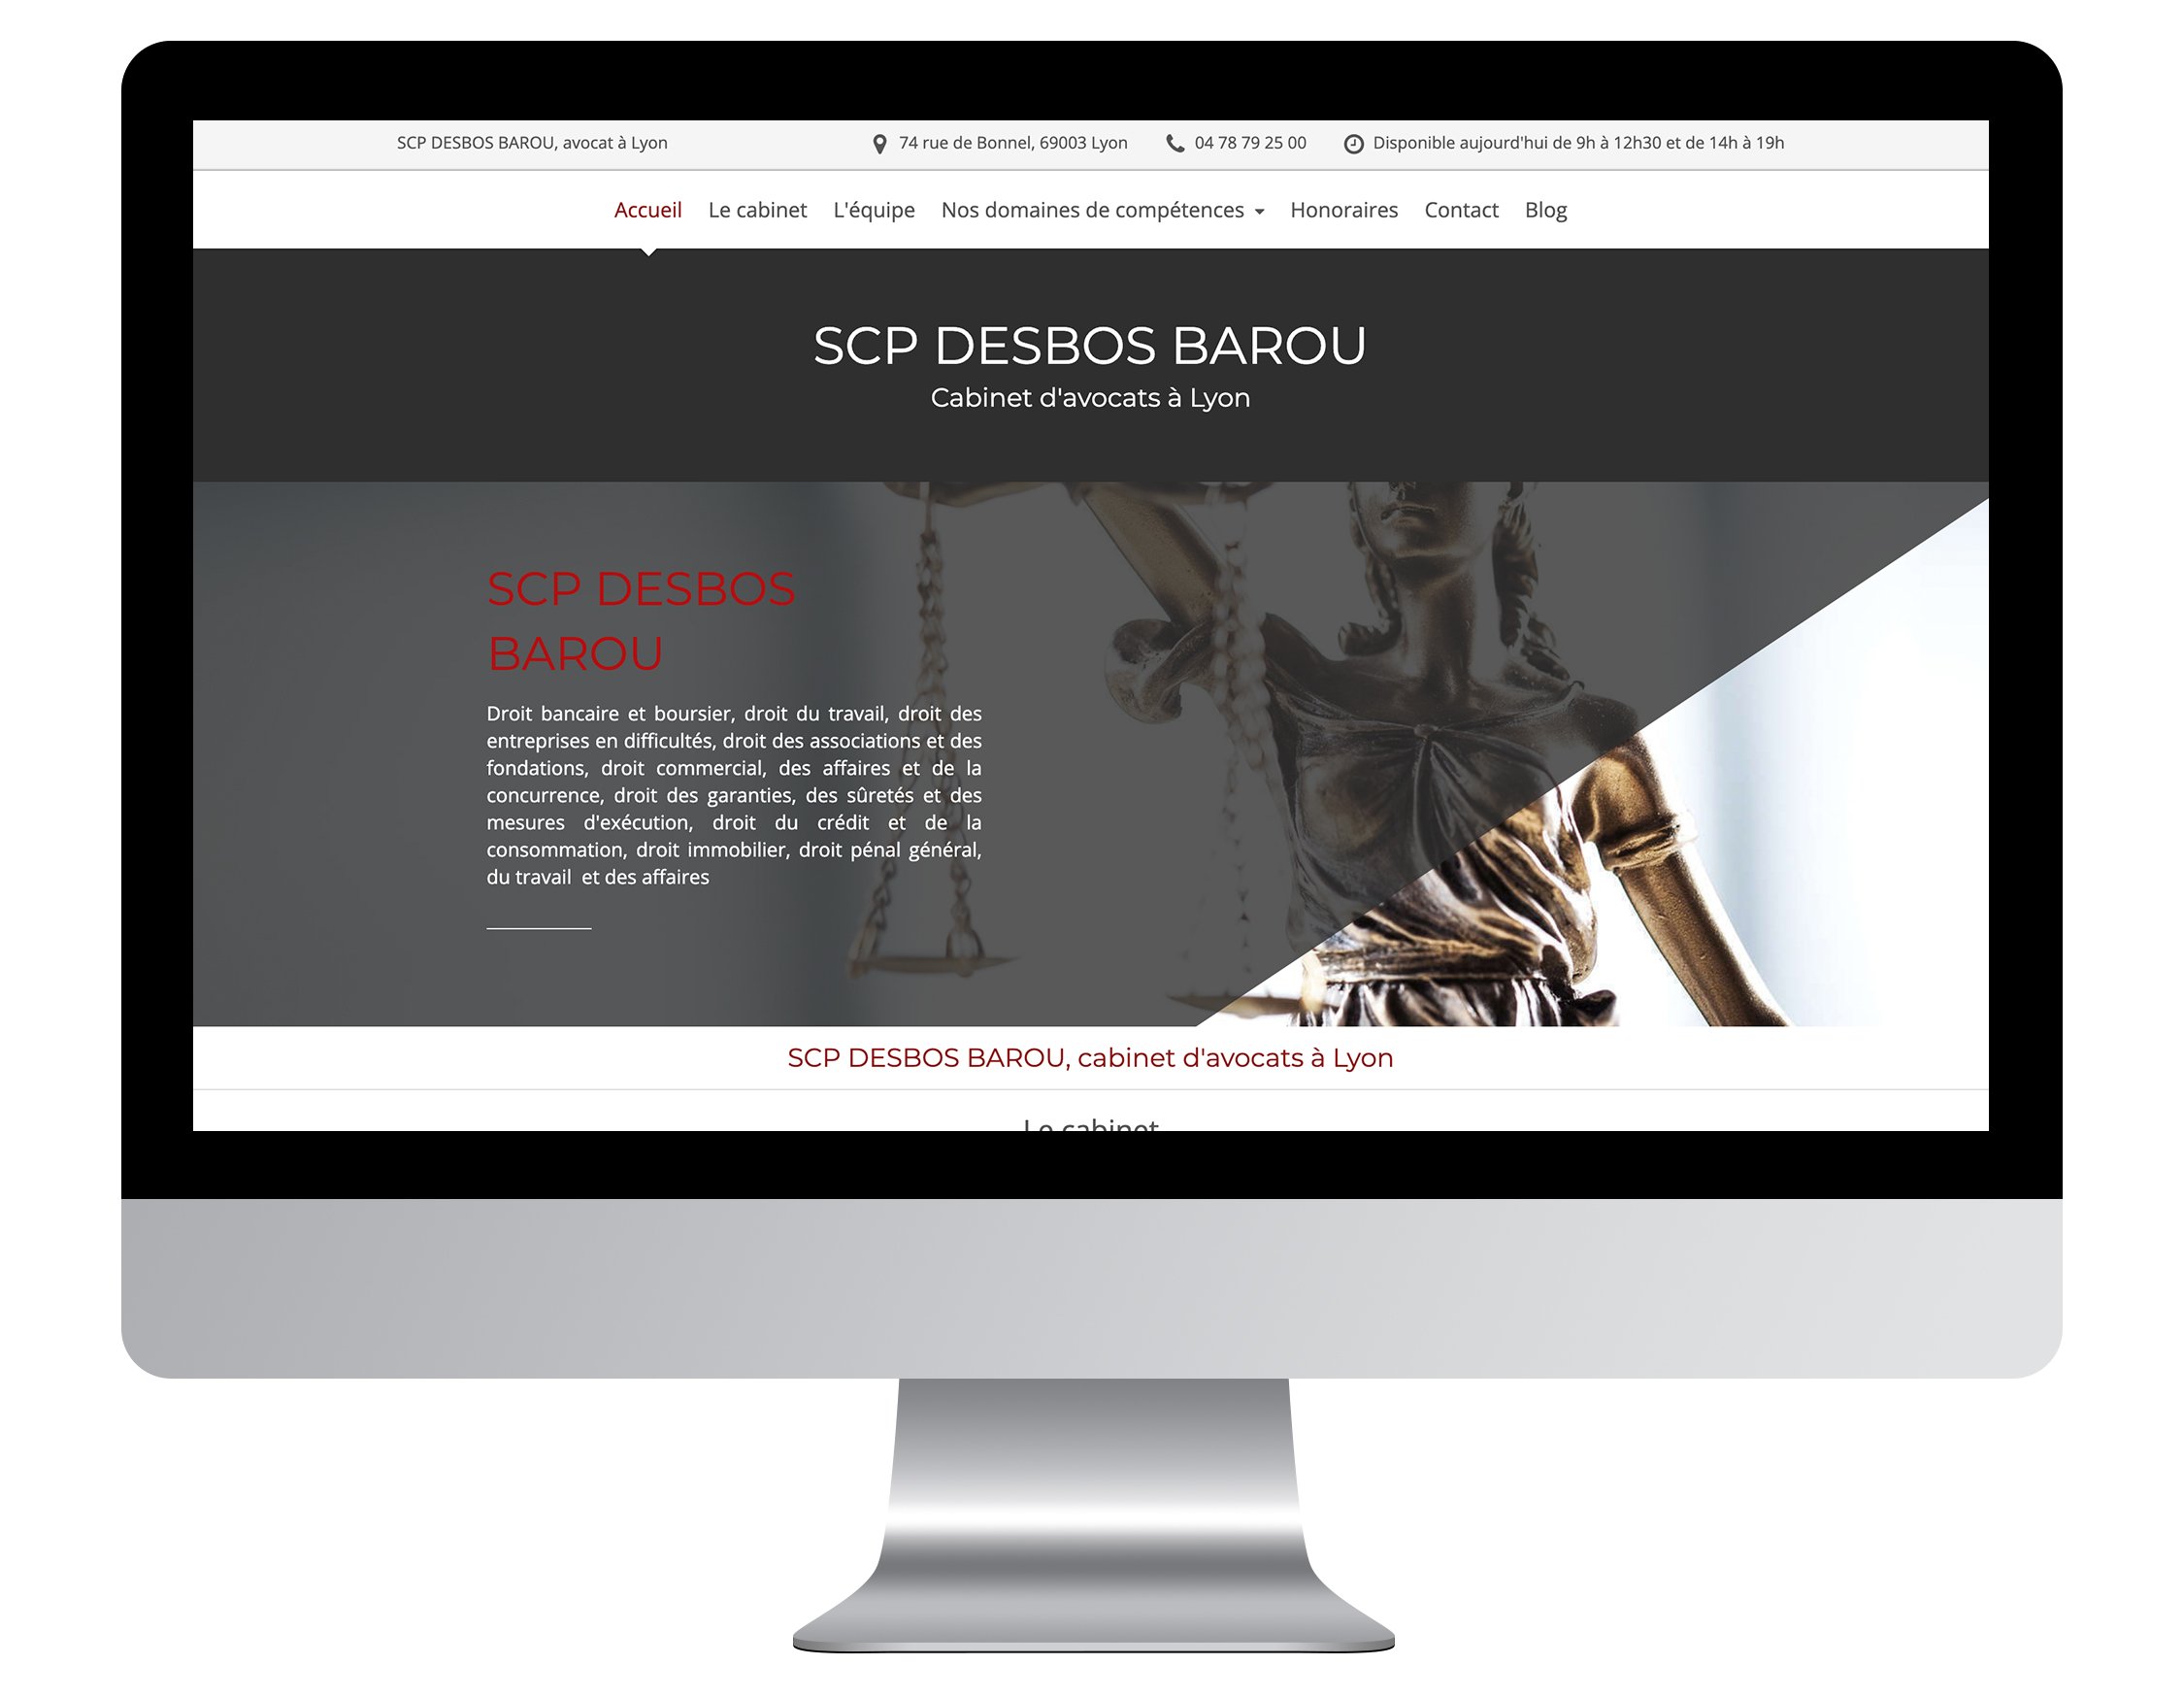 Mockup-exemple-site-scp-desbos-barou